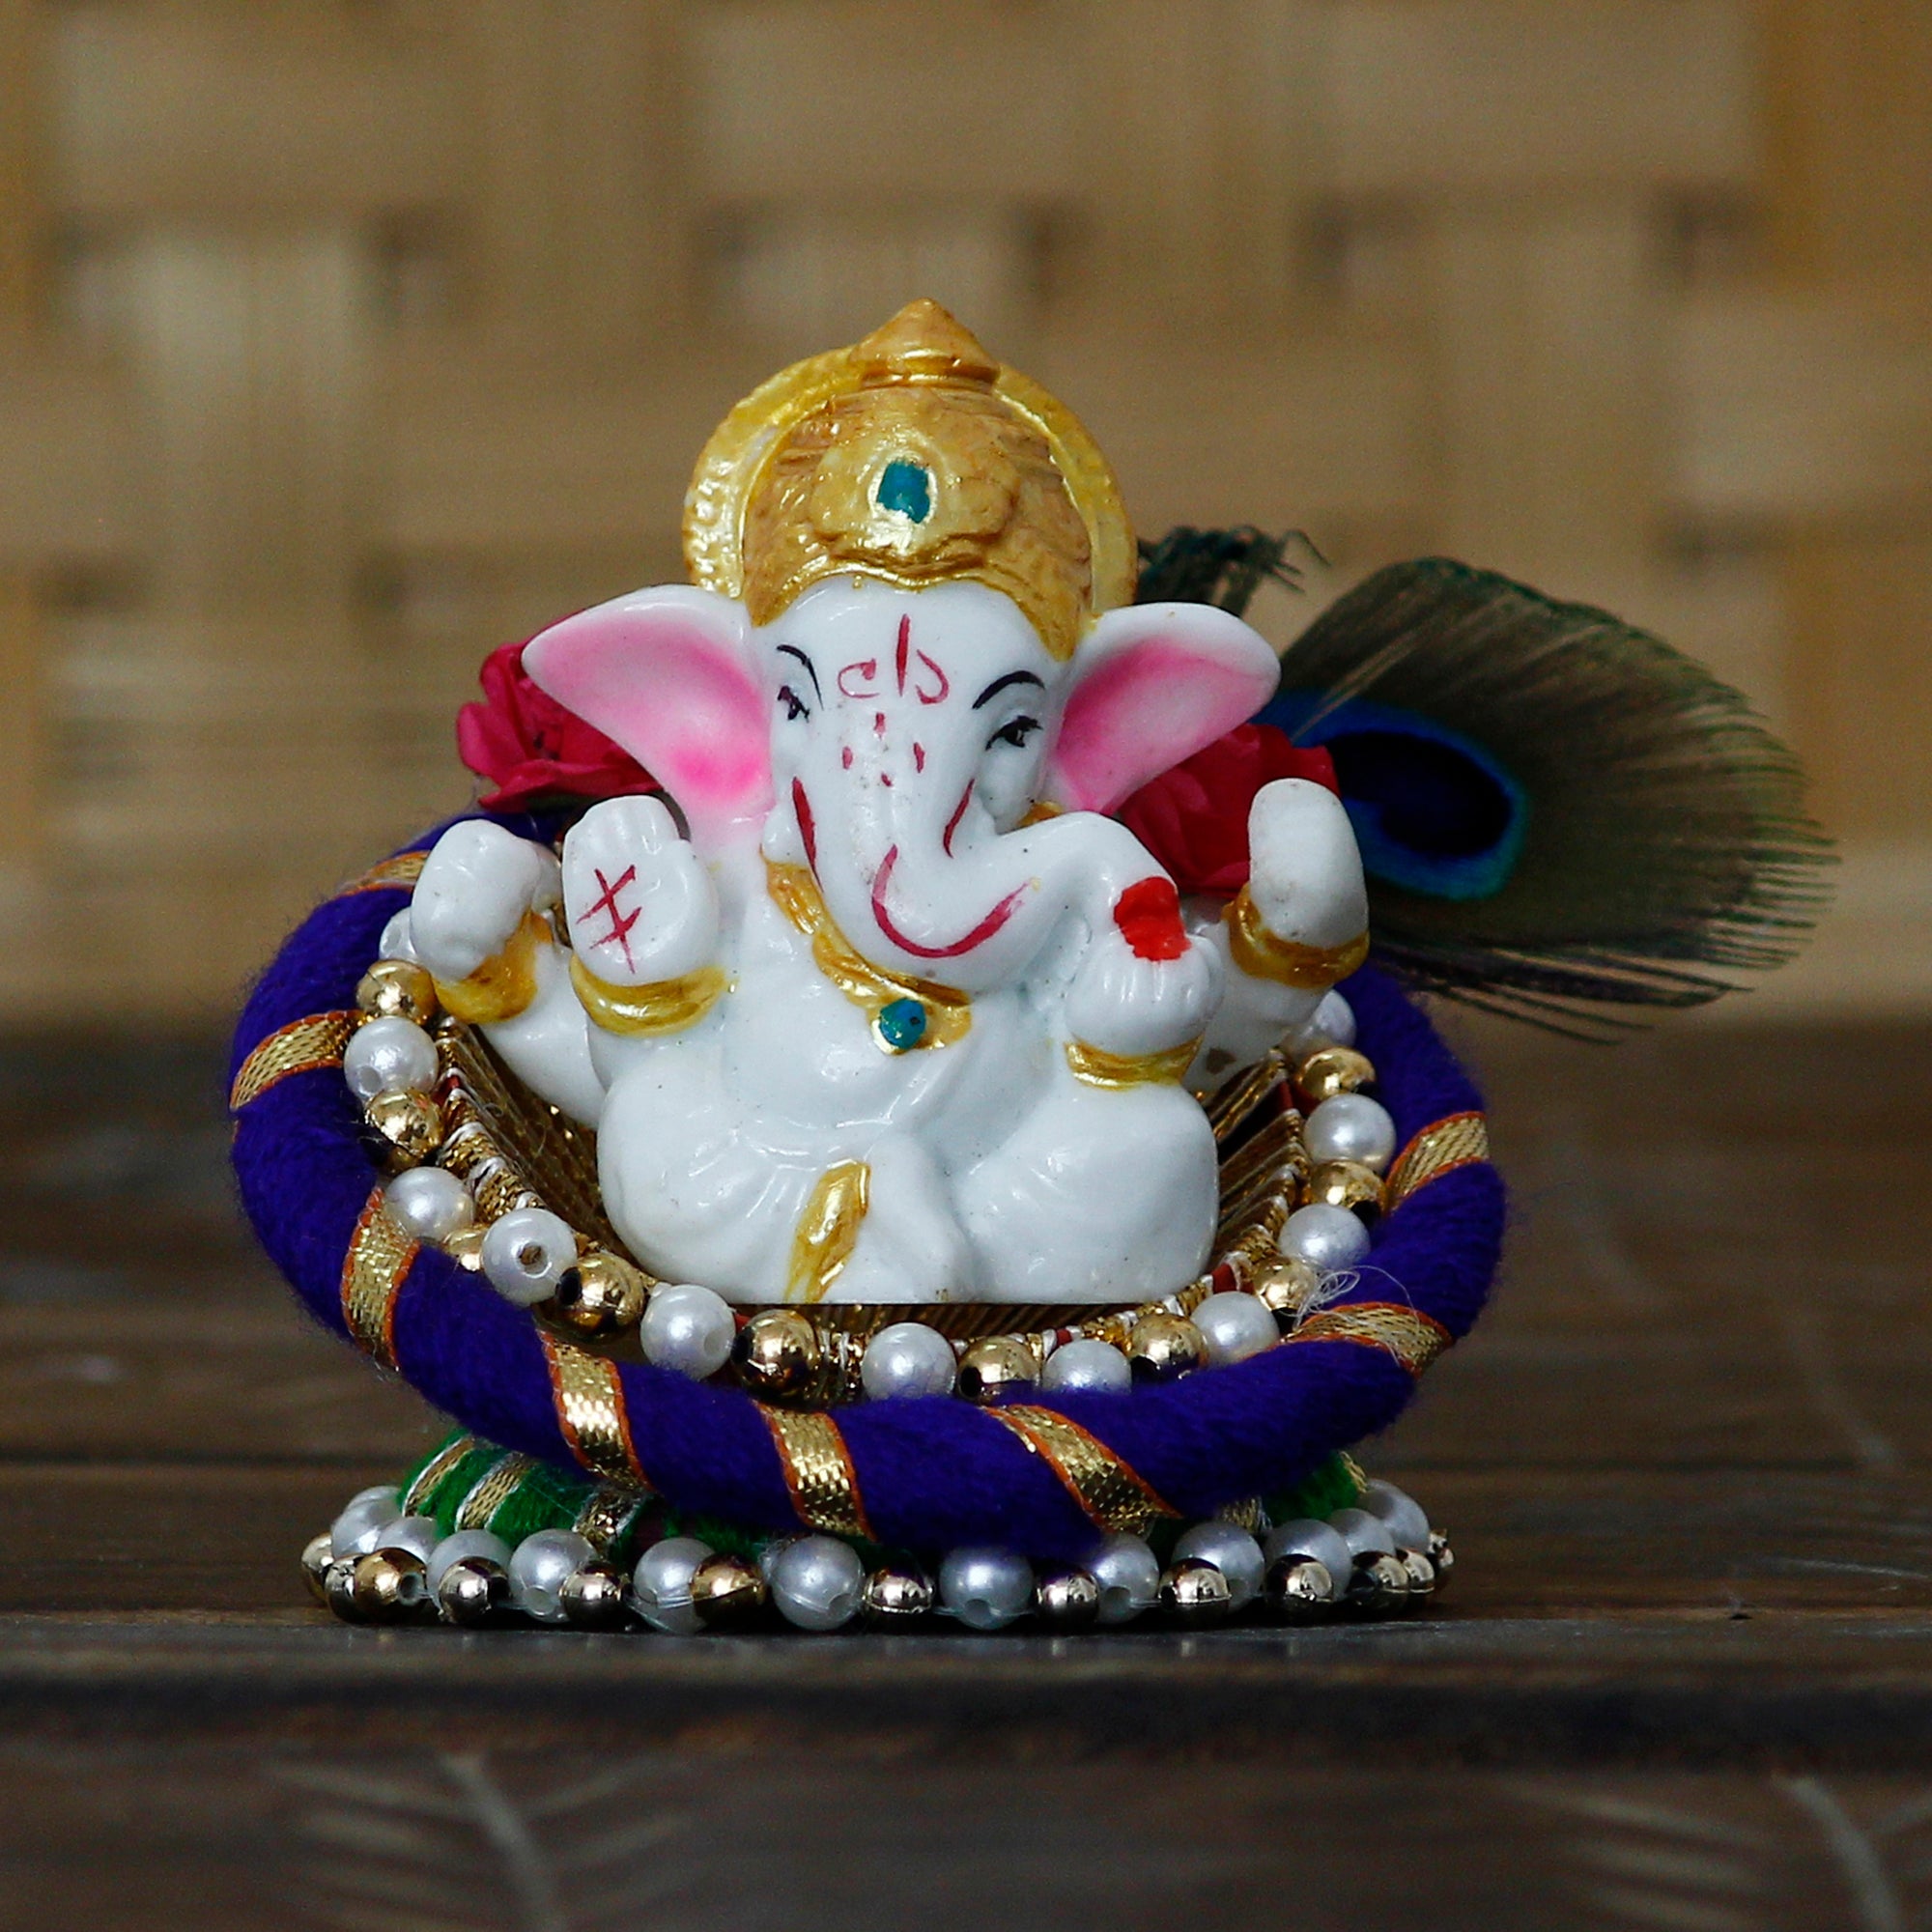 Polyresin Lord Ganesha Idol on Decorative Handcrafted Floral Plate for Home, Office and Car Dashboard 1